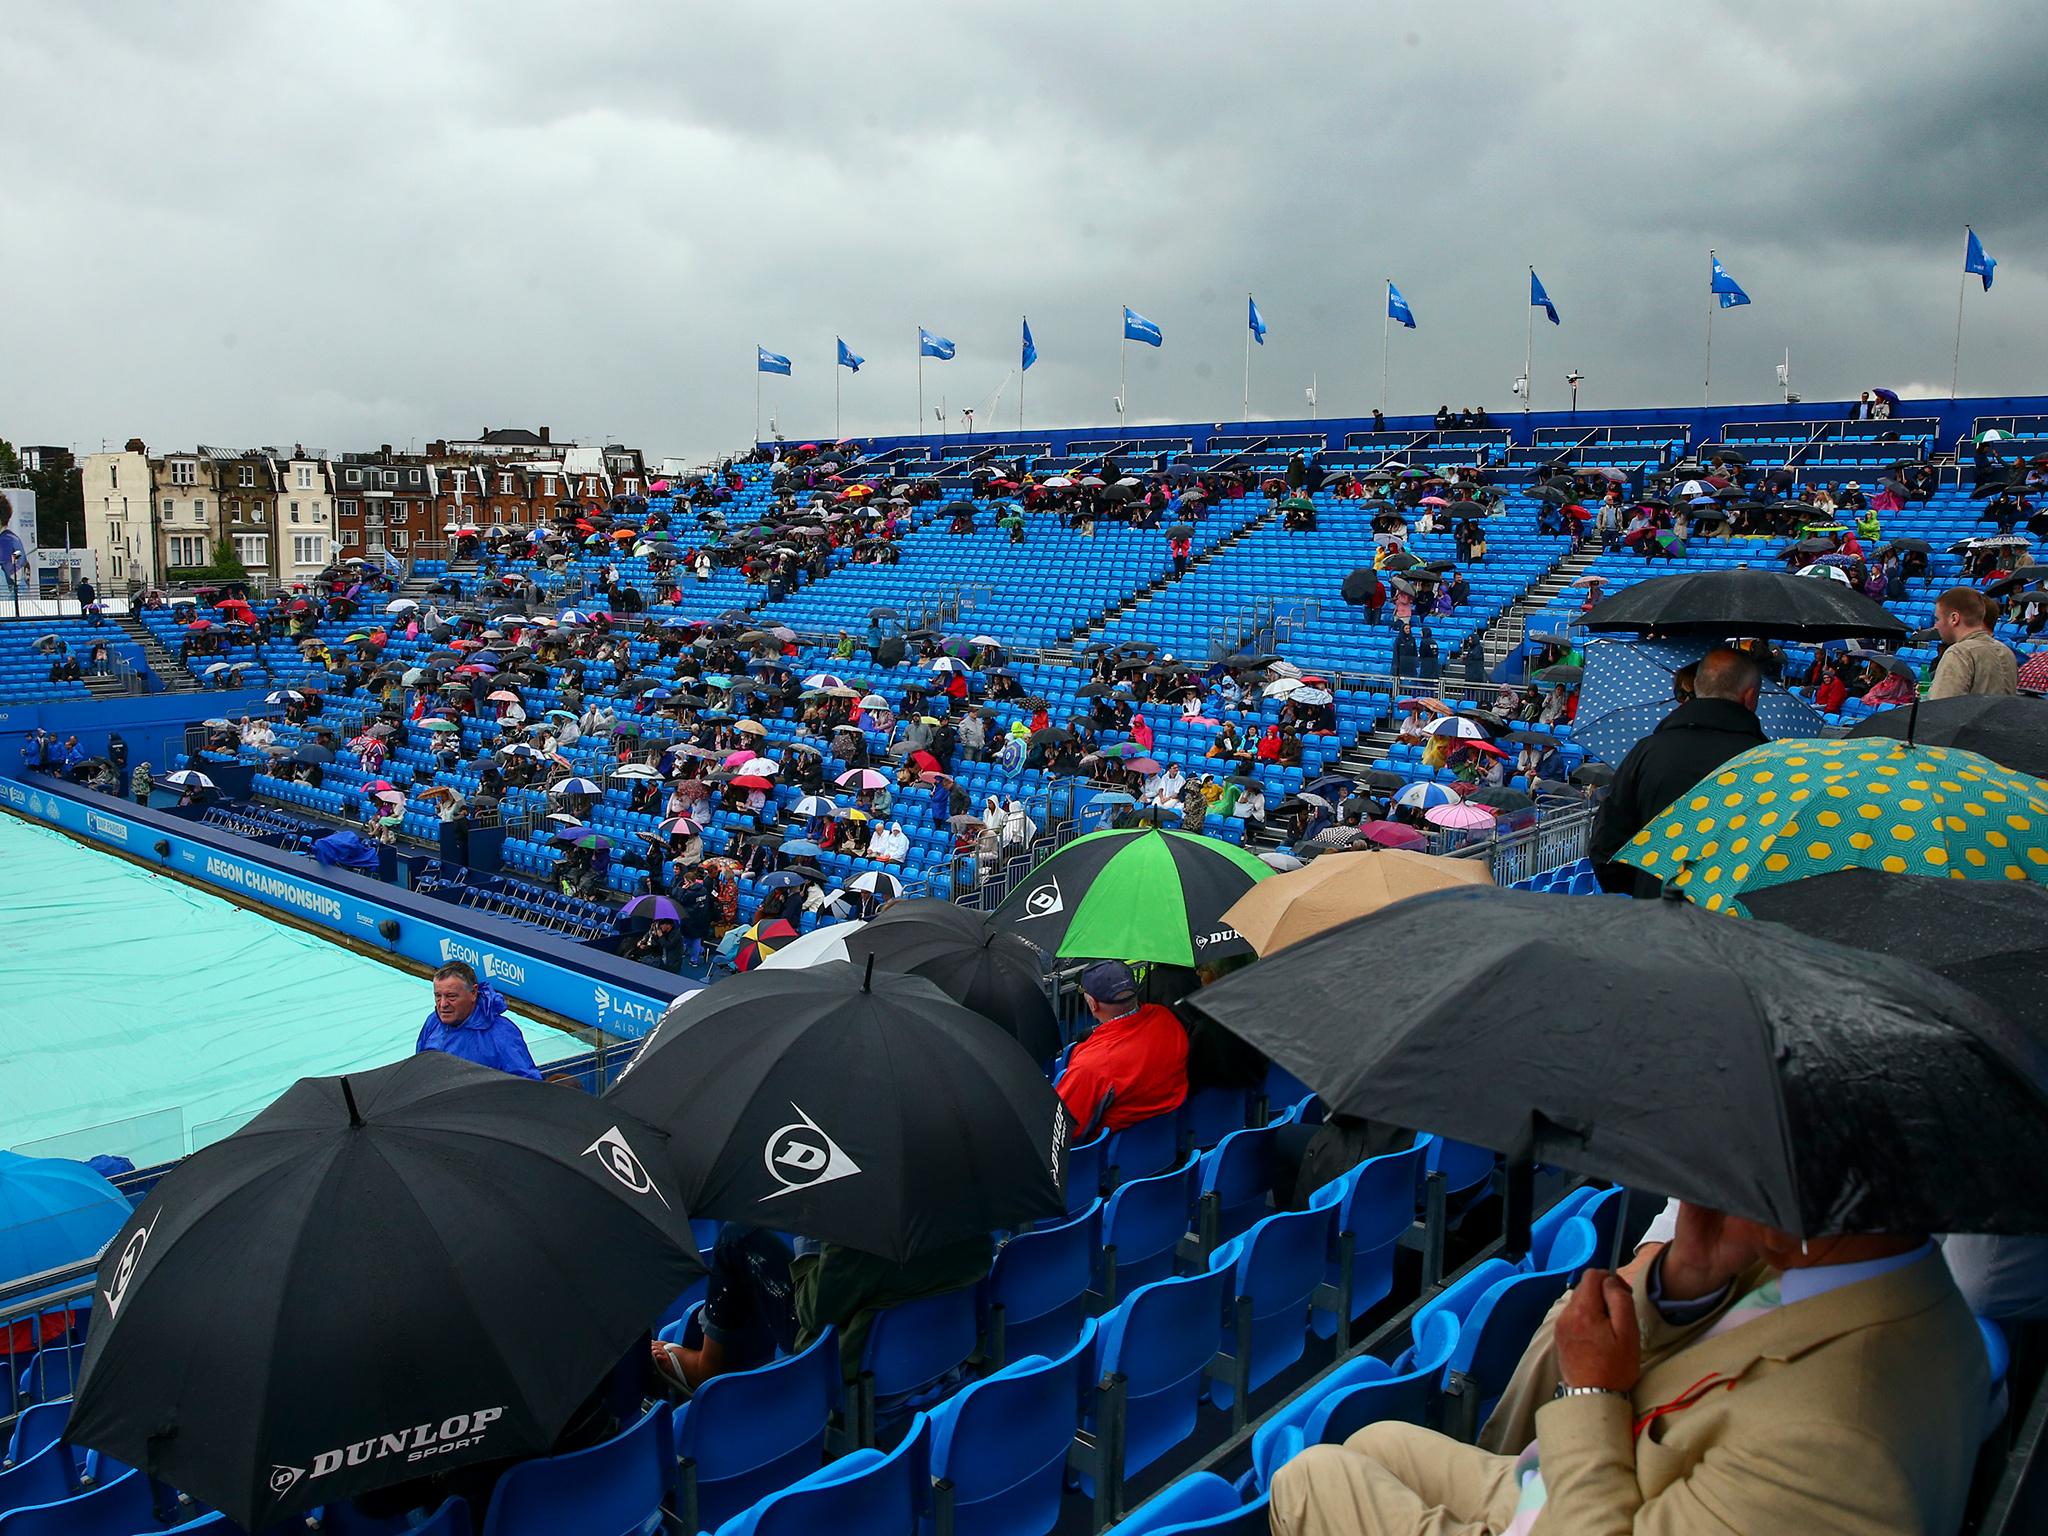 Rain halted play several times on the opening day of the Aegon Championships